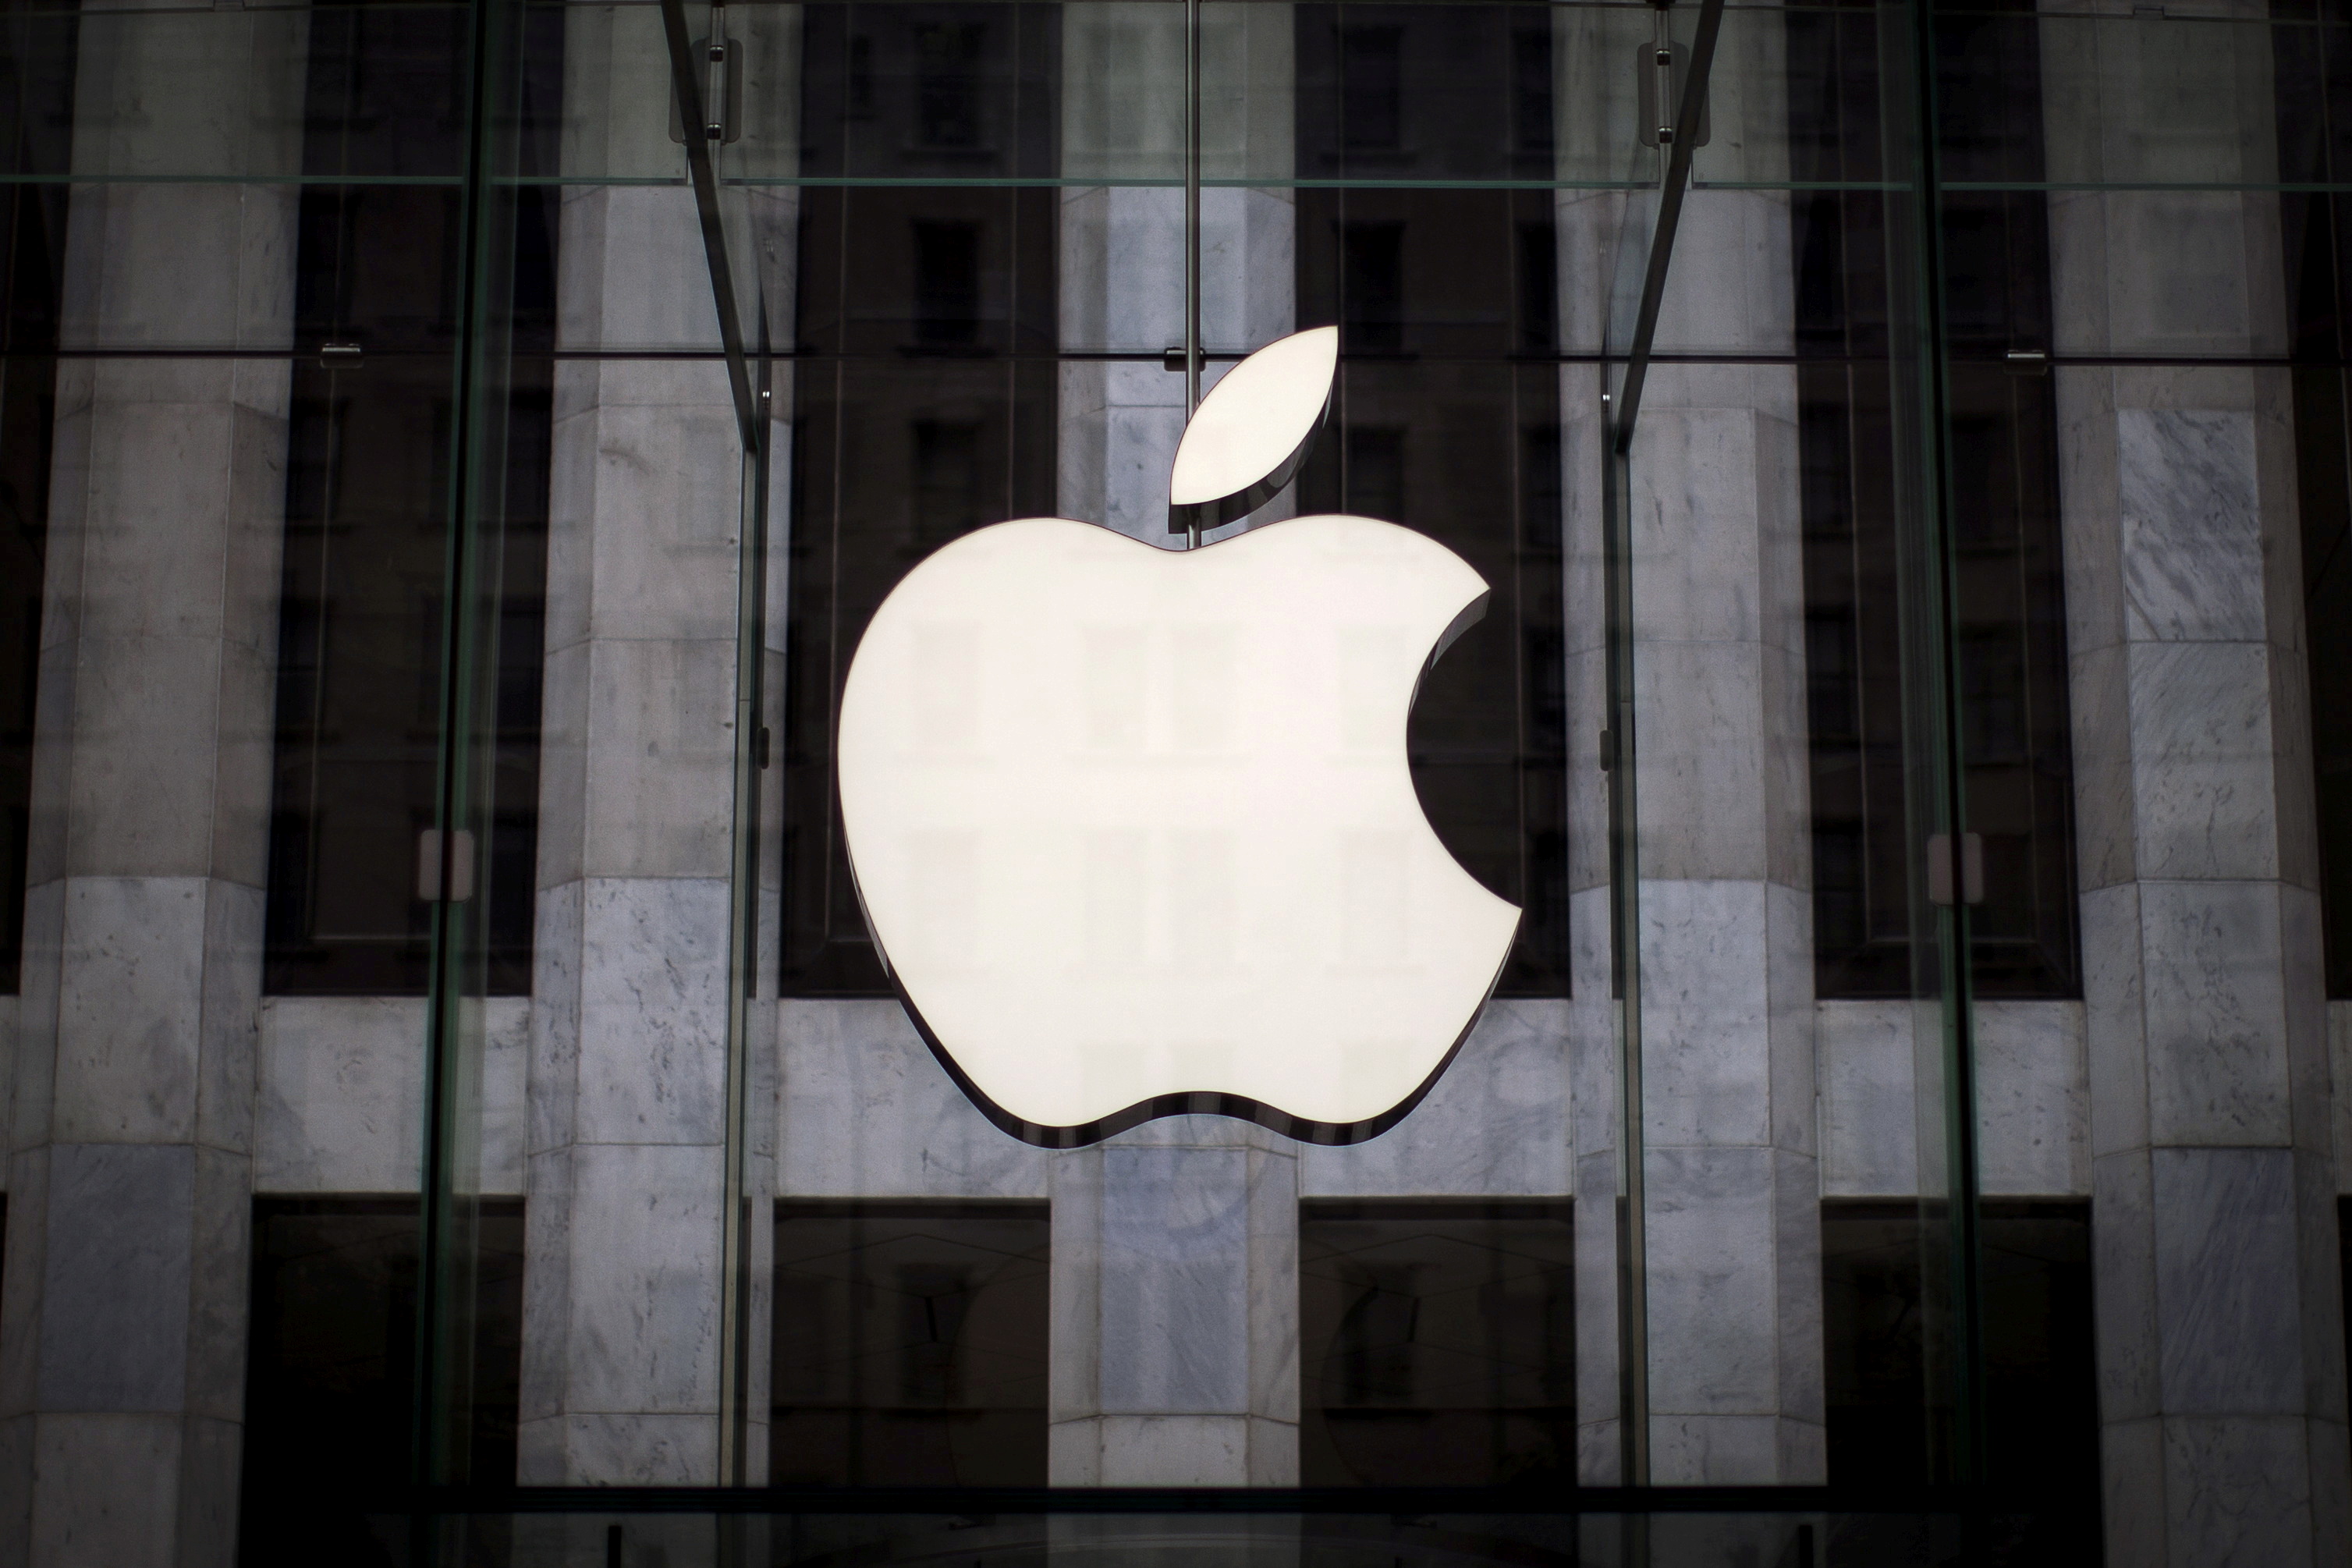 An Apple logo hangs above the entrance to the Apple store on 5th Avenue in the Manhattan borough of New York City, July 21, 2015. REUTERS/Mike Segar